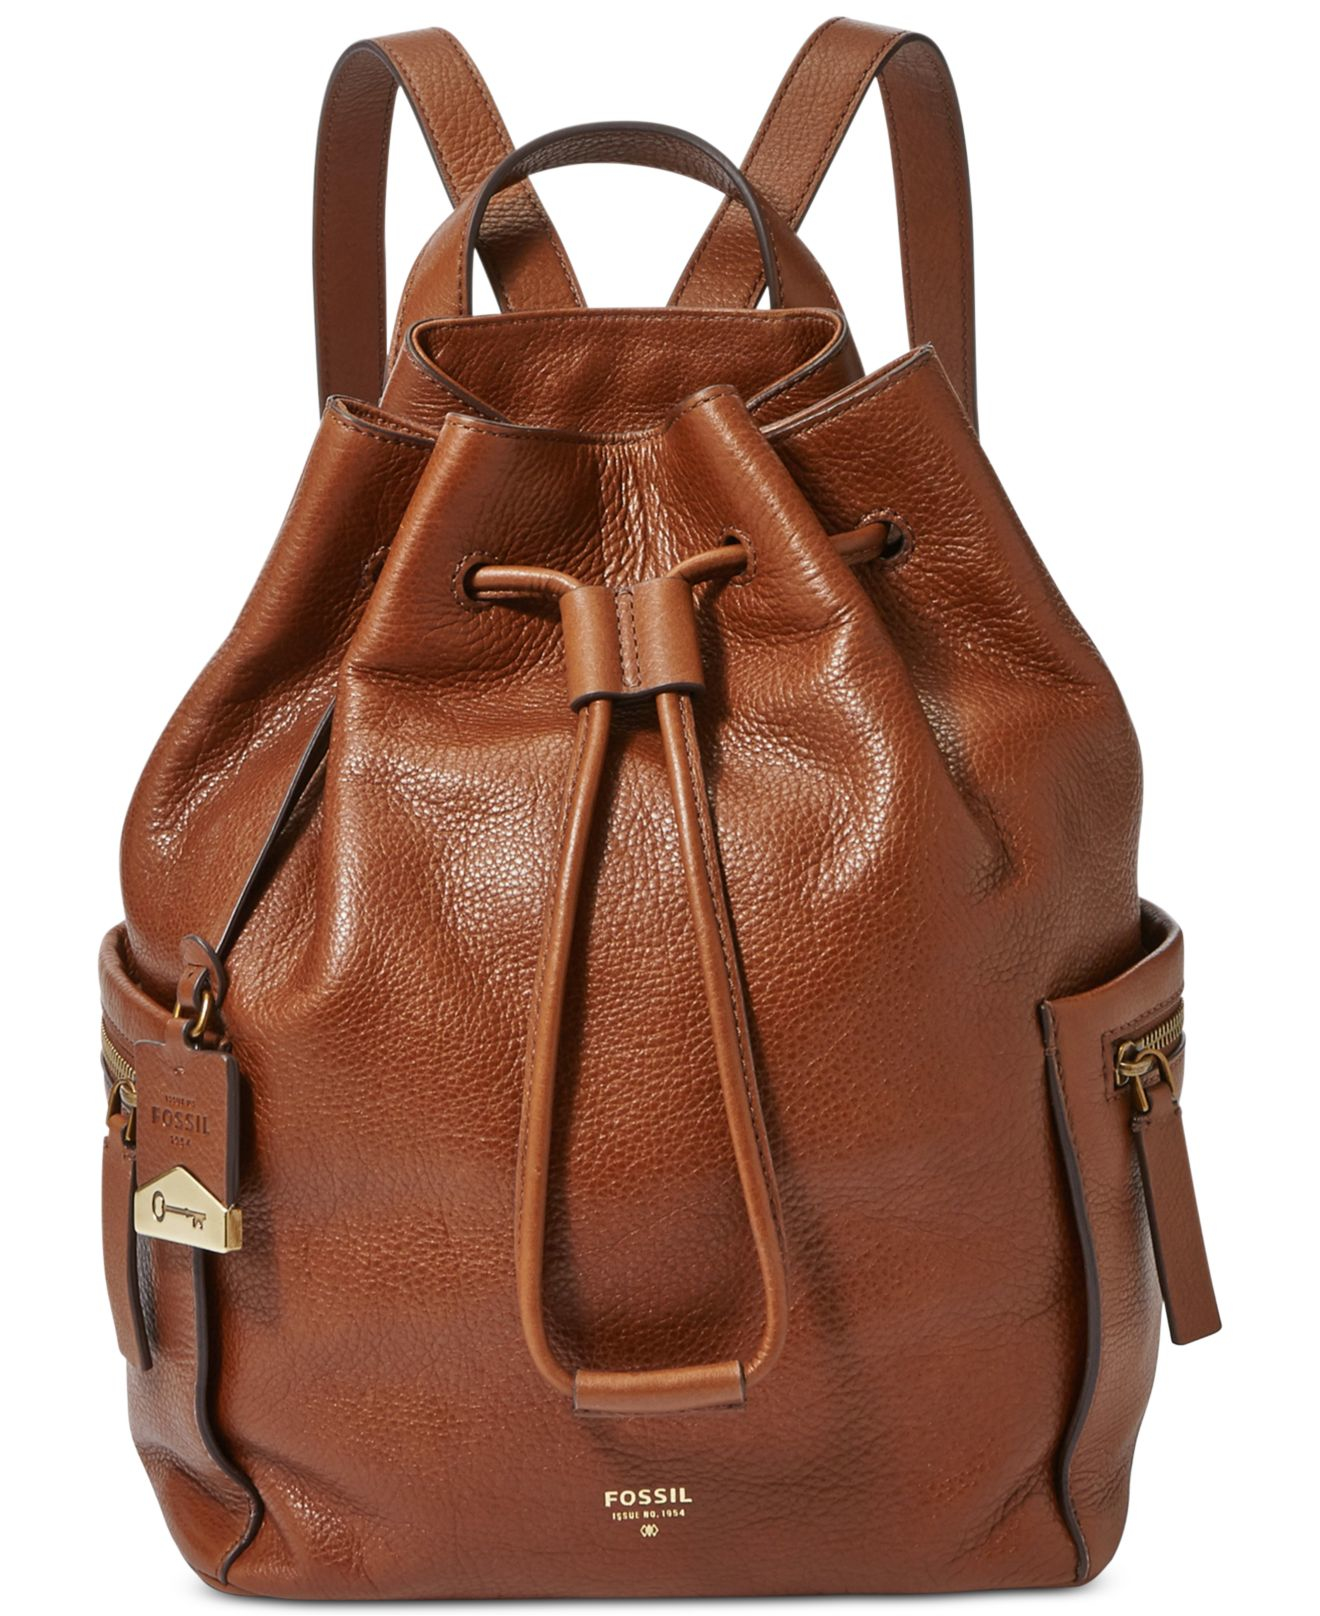 Fossil Vickery Leather Large Backpack in Brown - Lyst